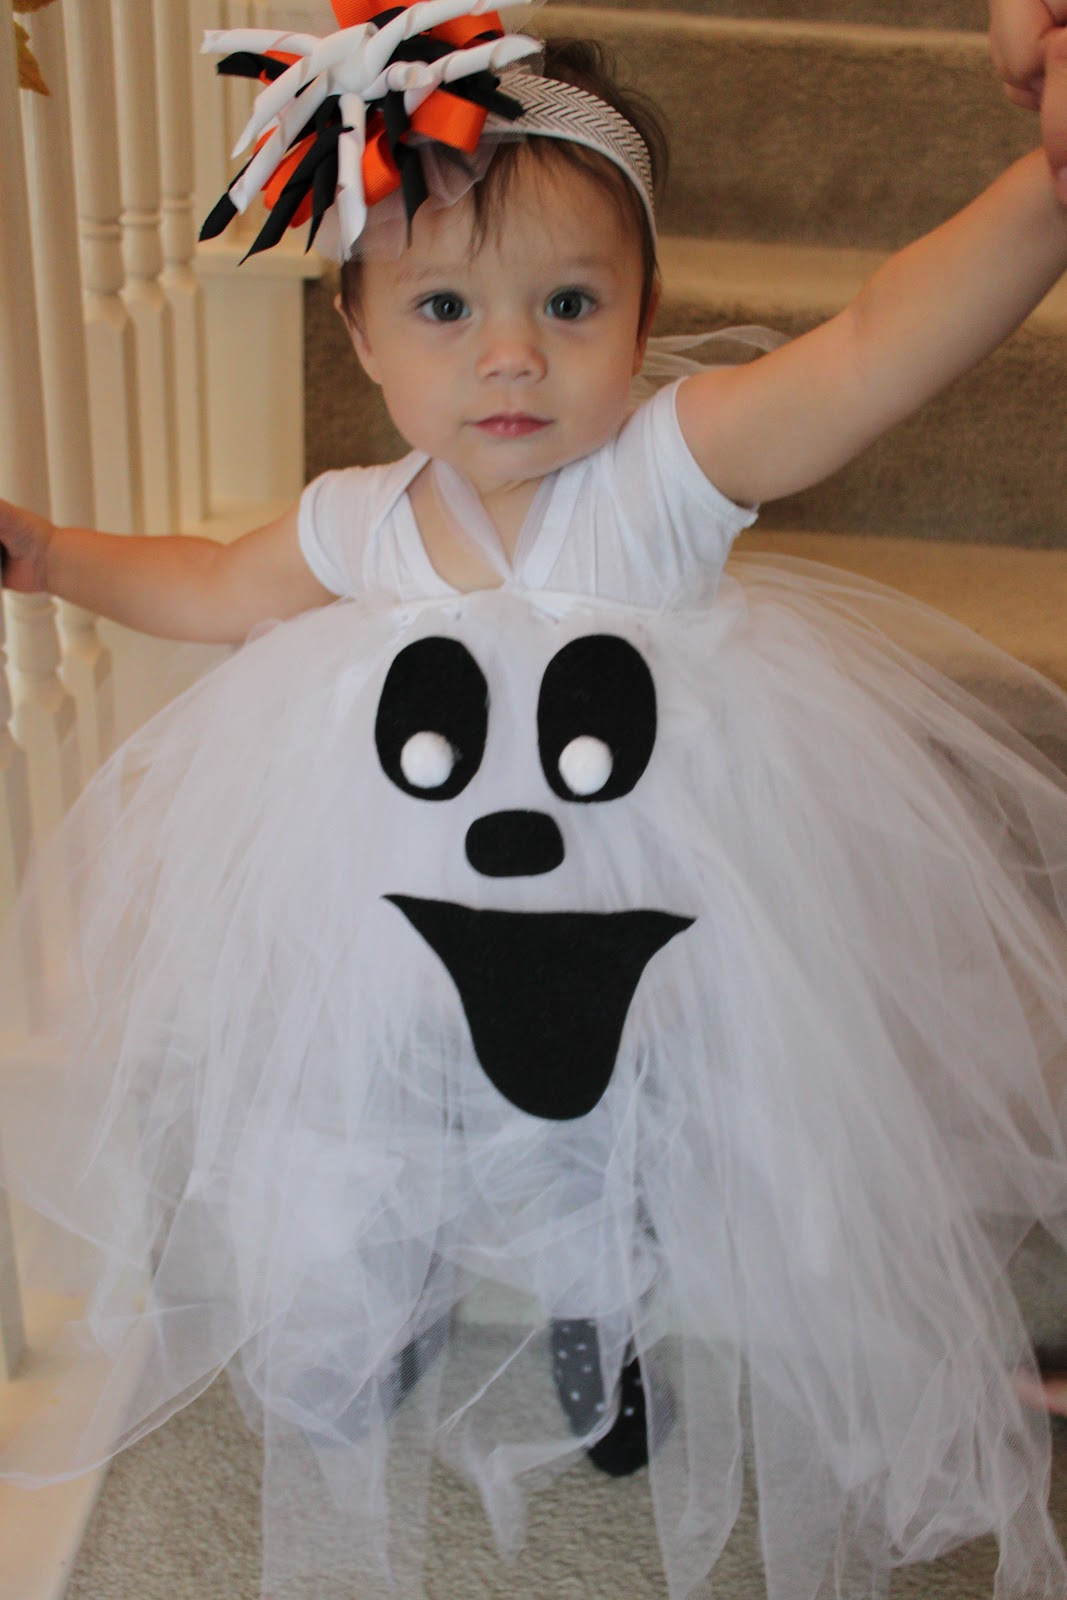 DIY Ghost Costume For Toddler
 Check Out These 50 Creative Baby Costumes For All Kinds of